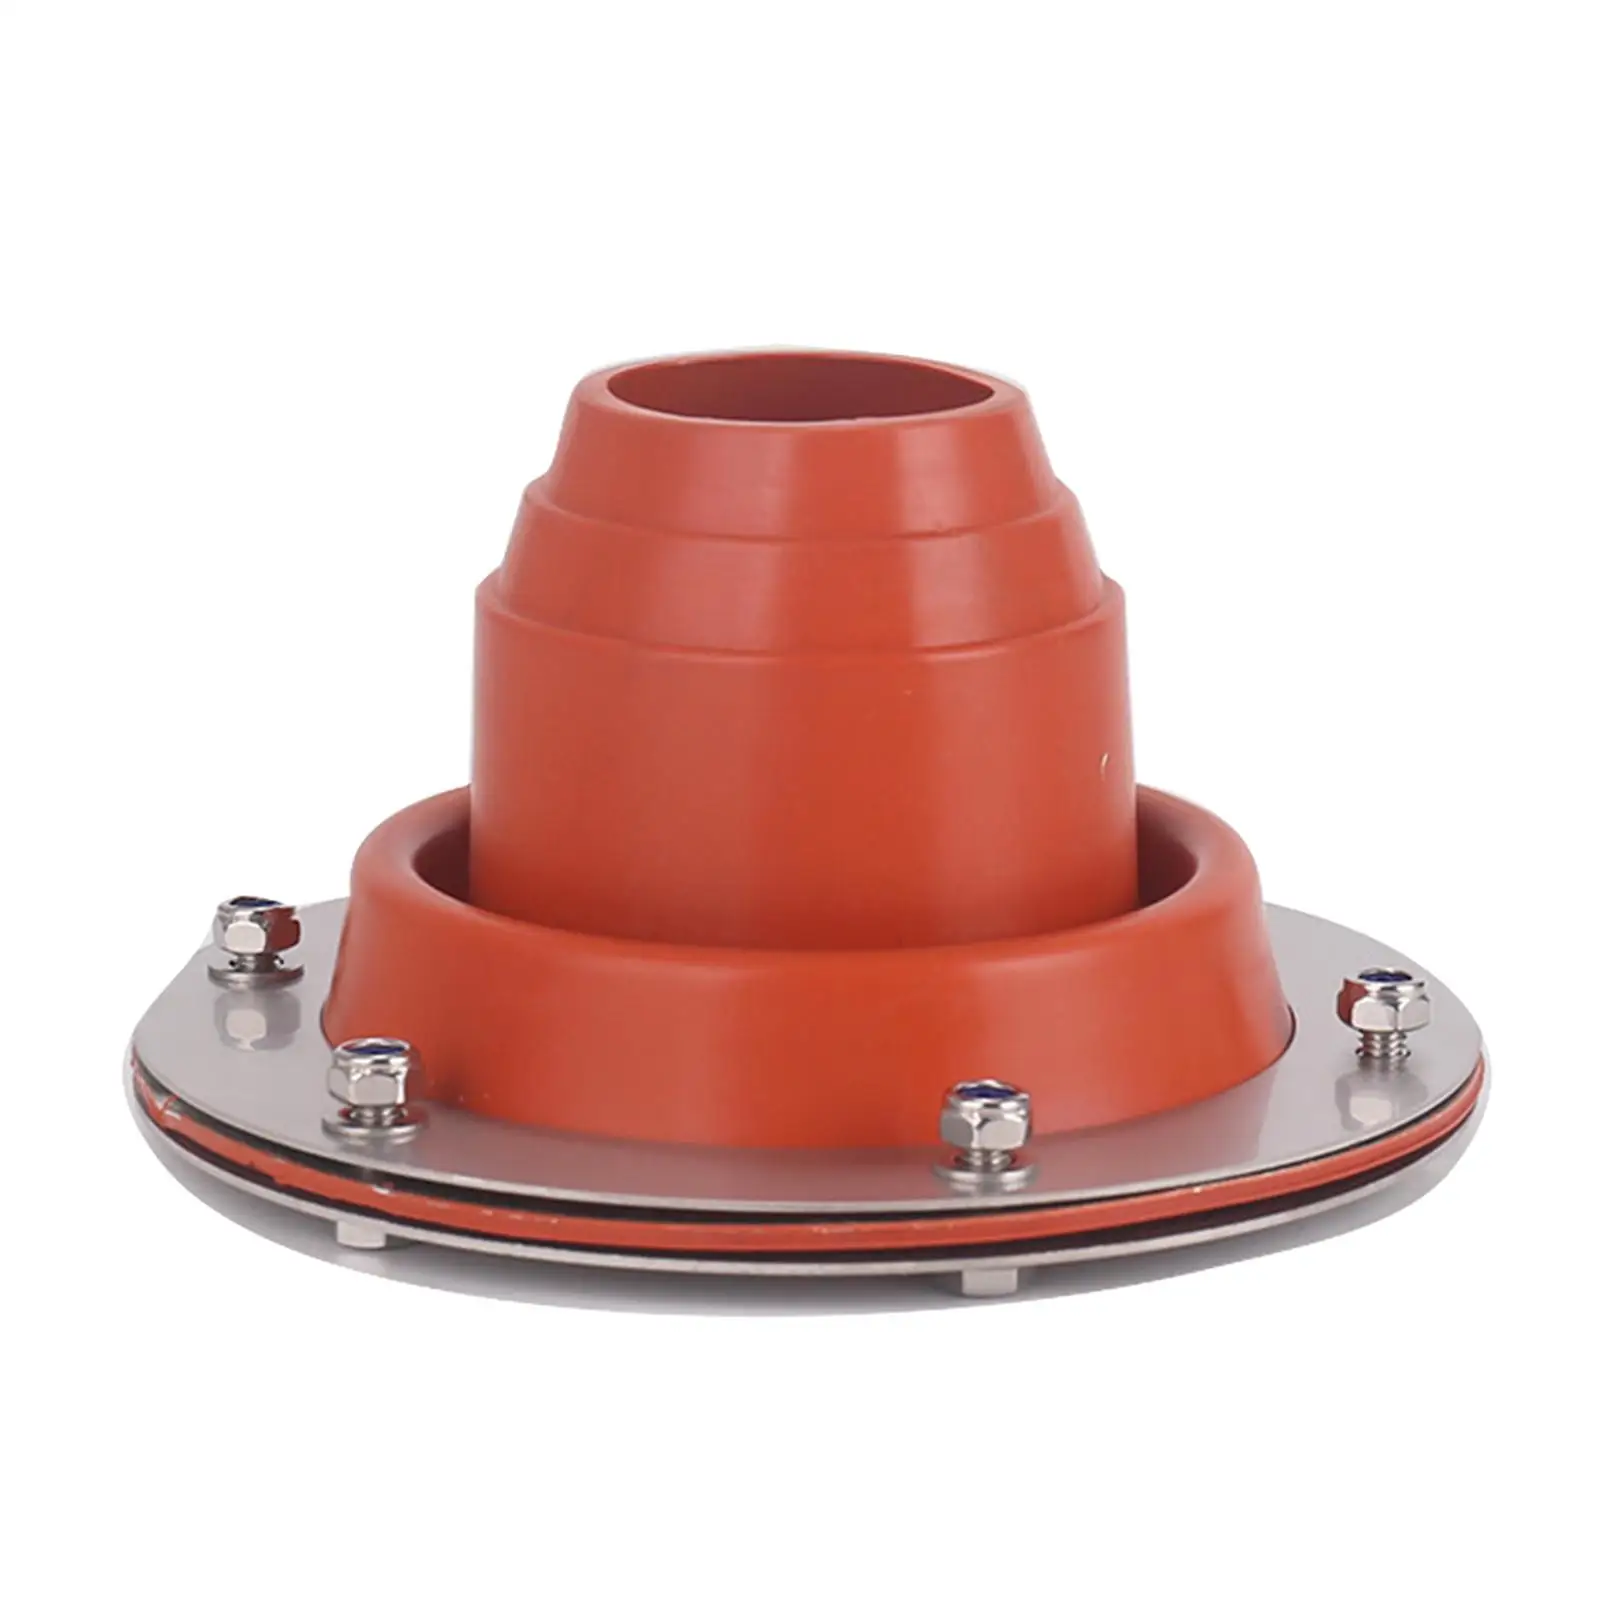 Tent Stove Jack Pipe Vent Silicone Tube Fire Resistant Keep Your Use Of Hot Flue Pipes Safe and Secure